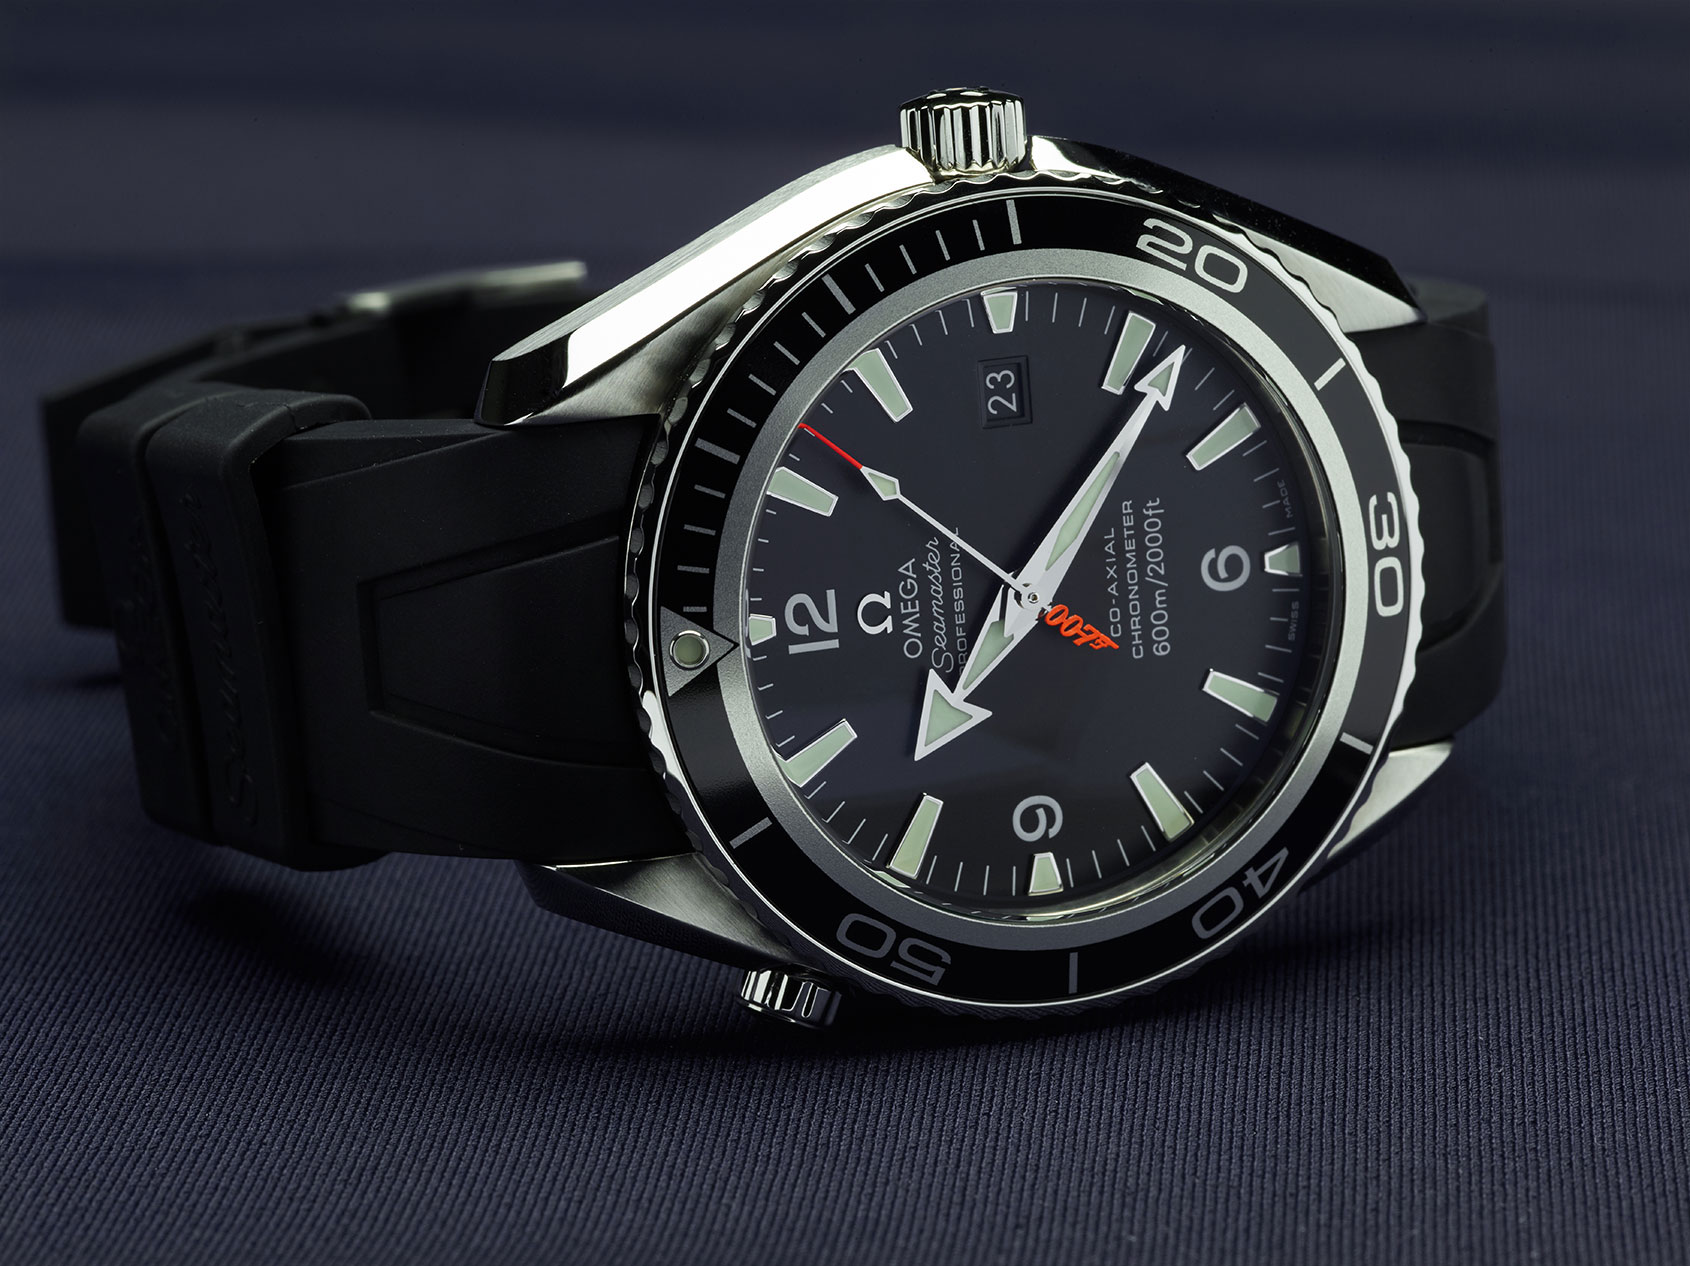 The Omega Seamaster 300 Spectre limited edition Is this the best Bond